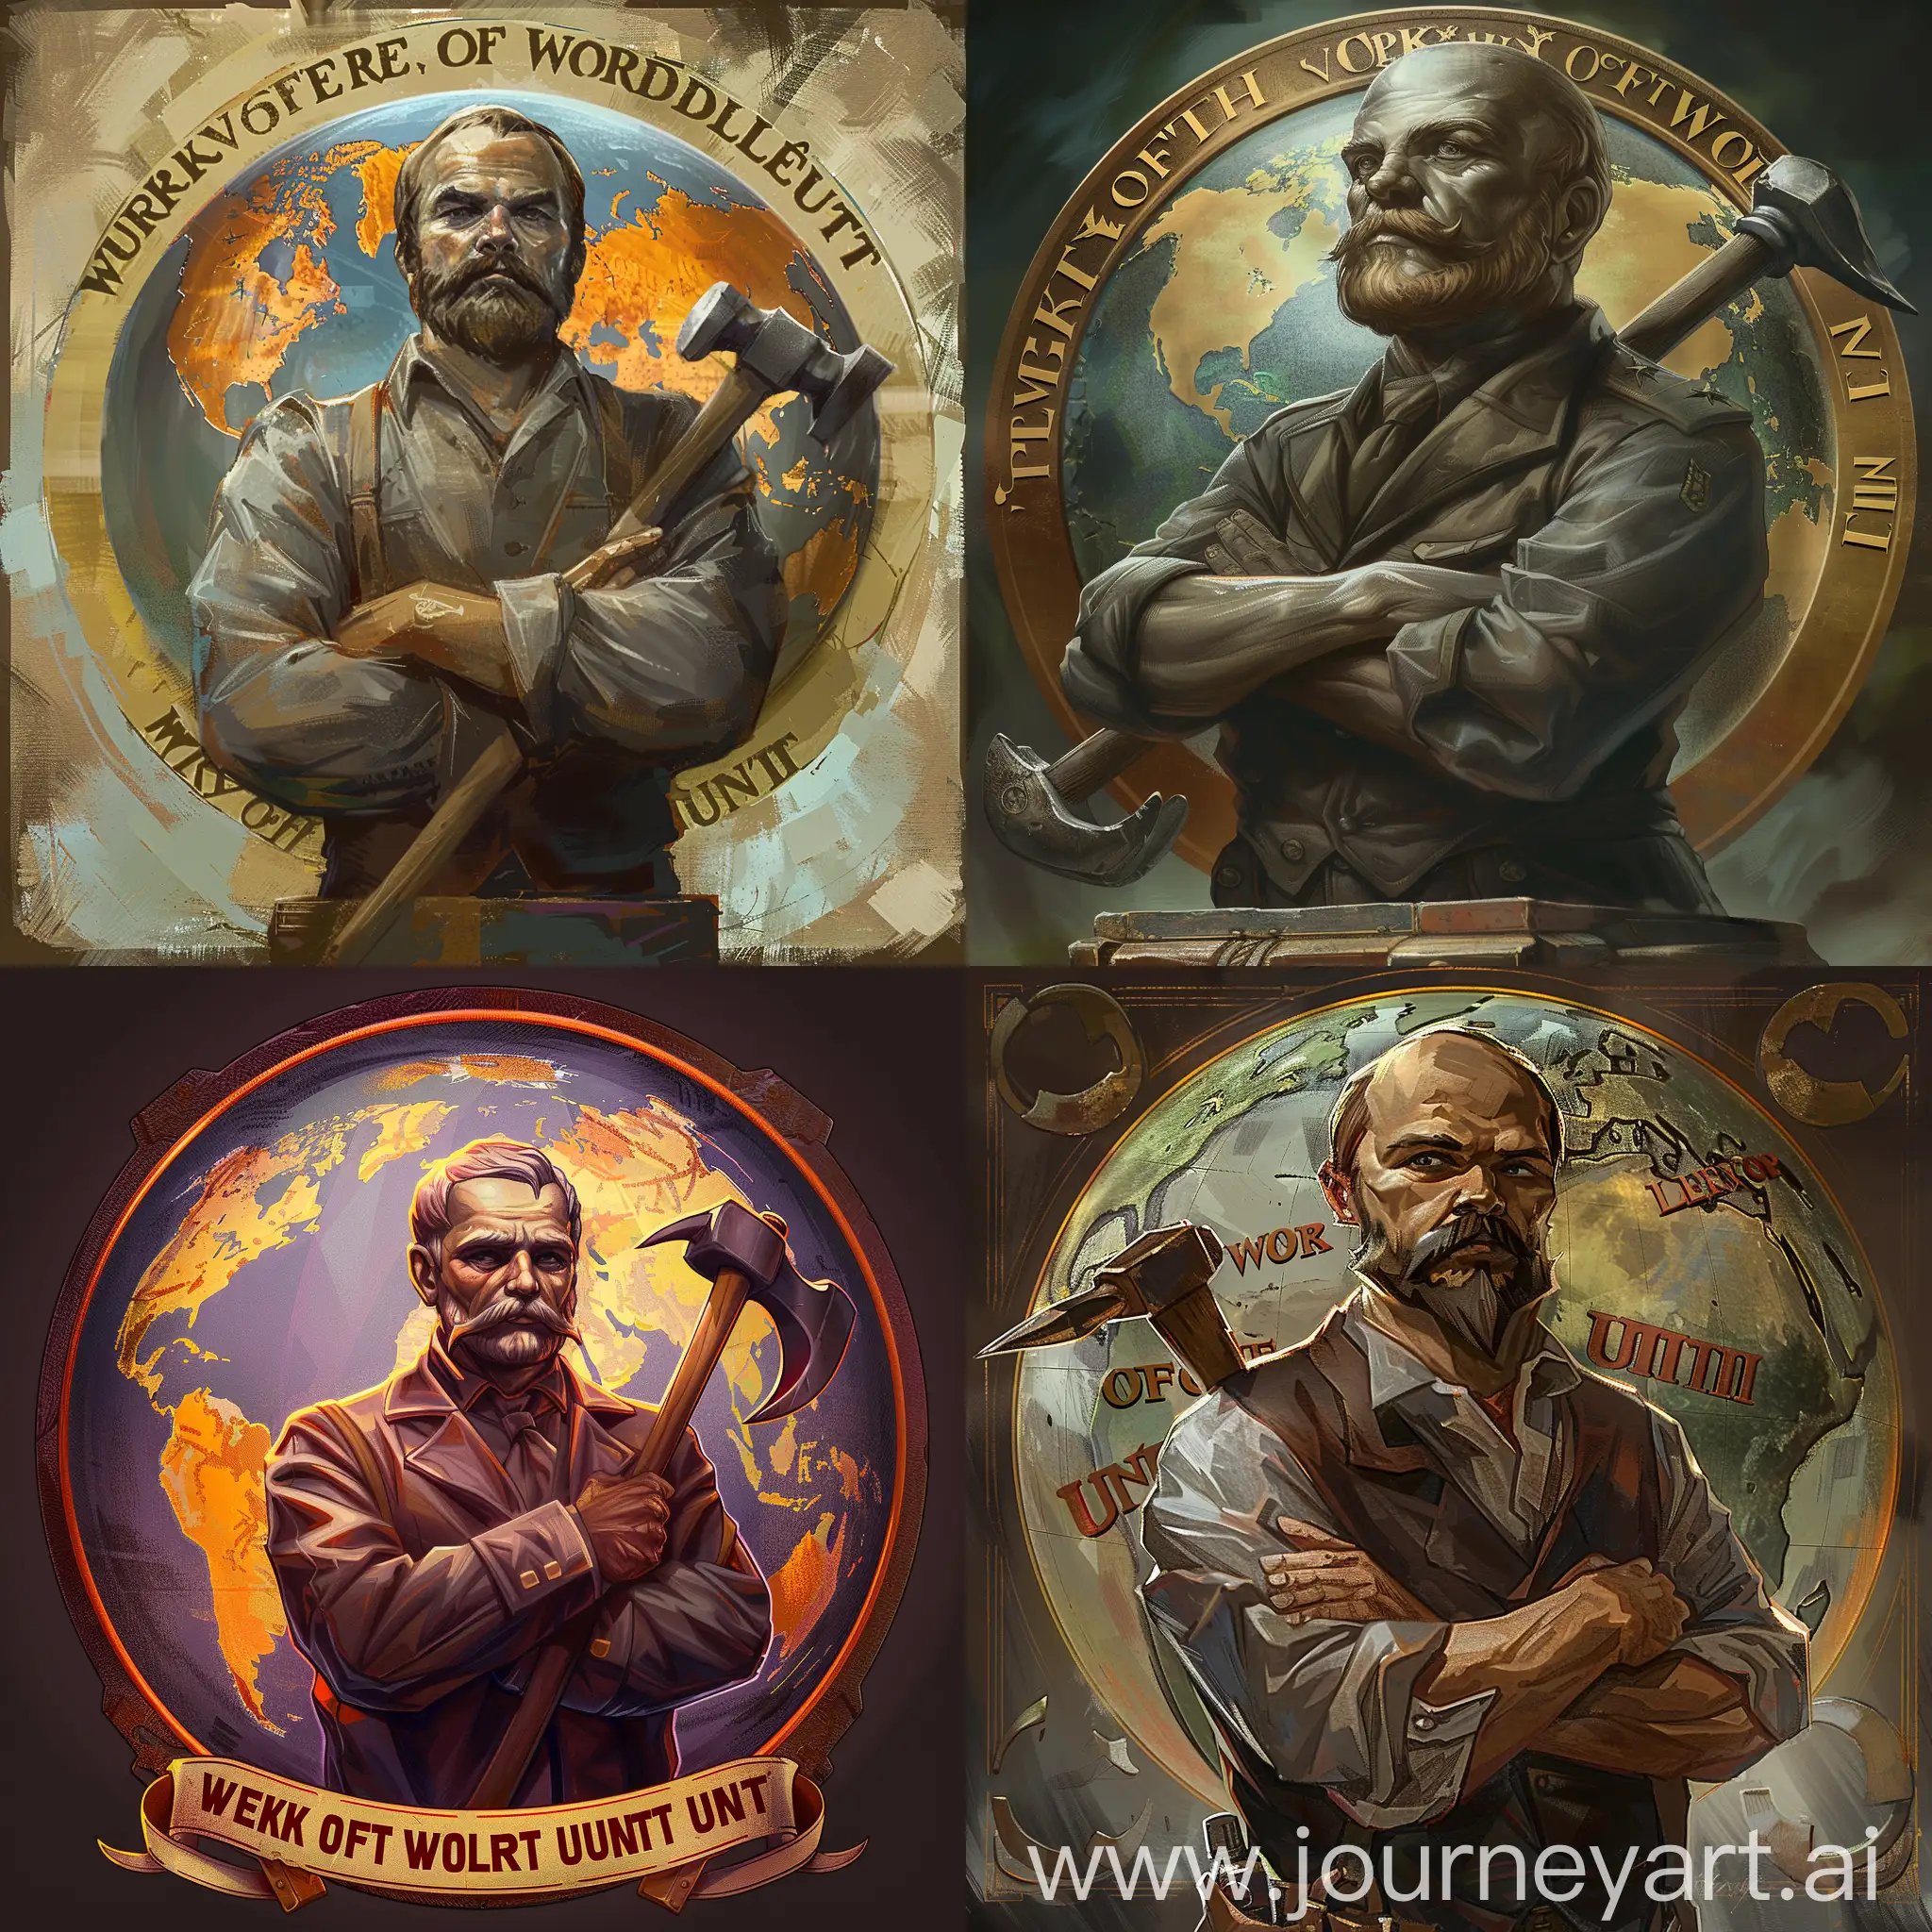 a digital painting in dnd style of the bust of Vladimir Lenin with his arms crossed, carrying a sickle in his right hand and a hammer in his left hand, in the background the world globe with the phrase "workers of the world, unite" around it